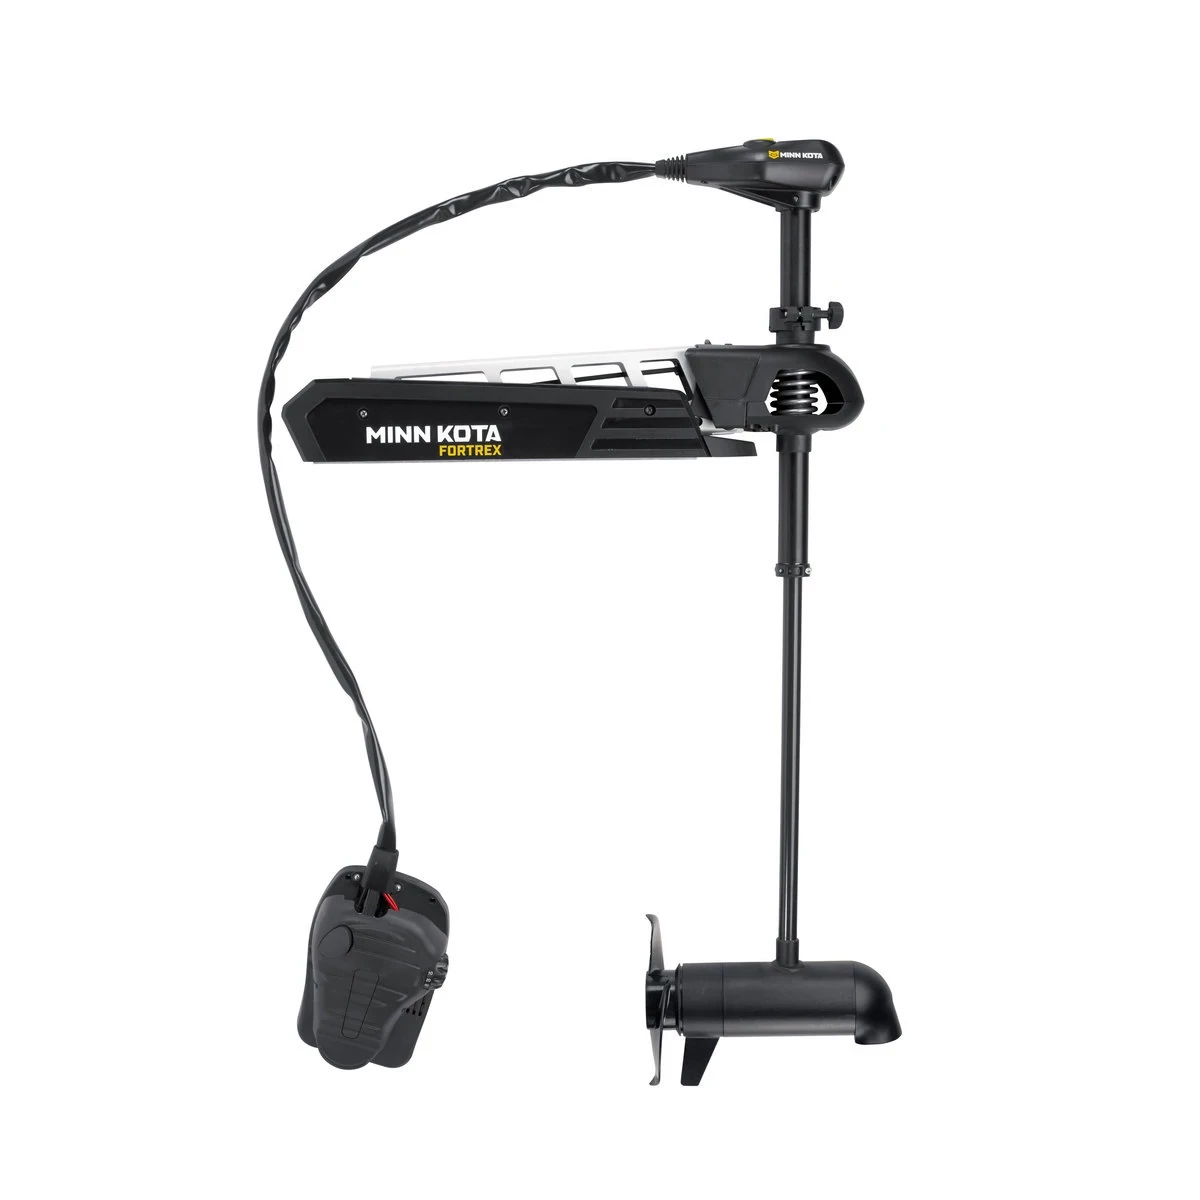 Fortrex 112 pound thrust with built-in Universal Sonar 2